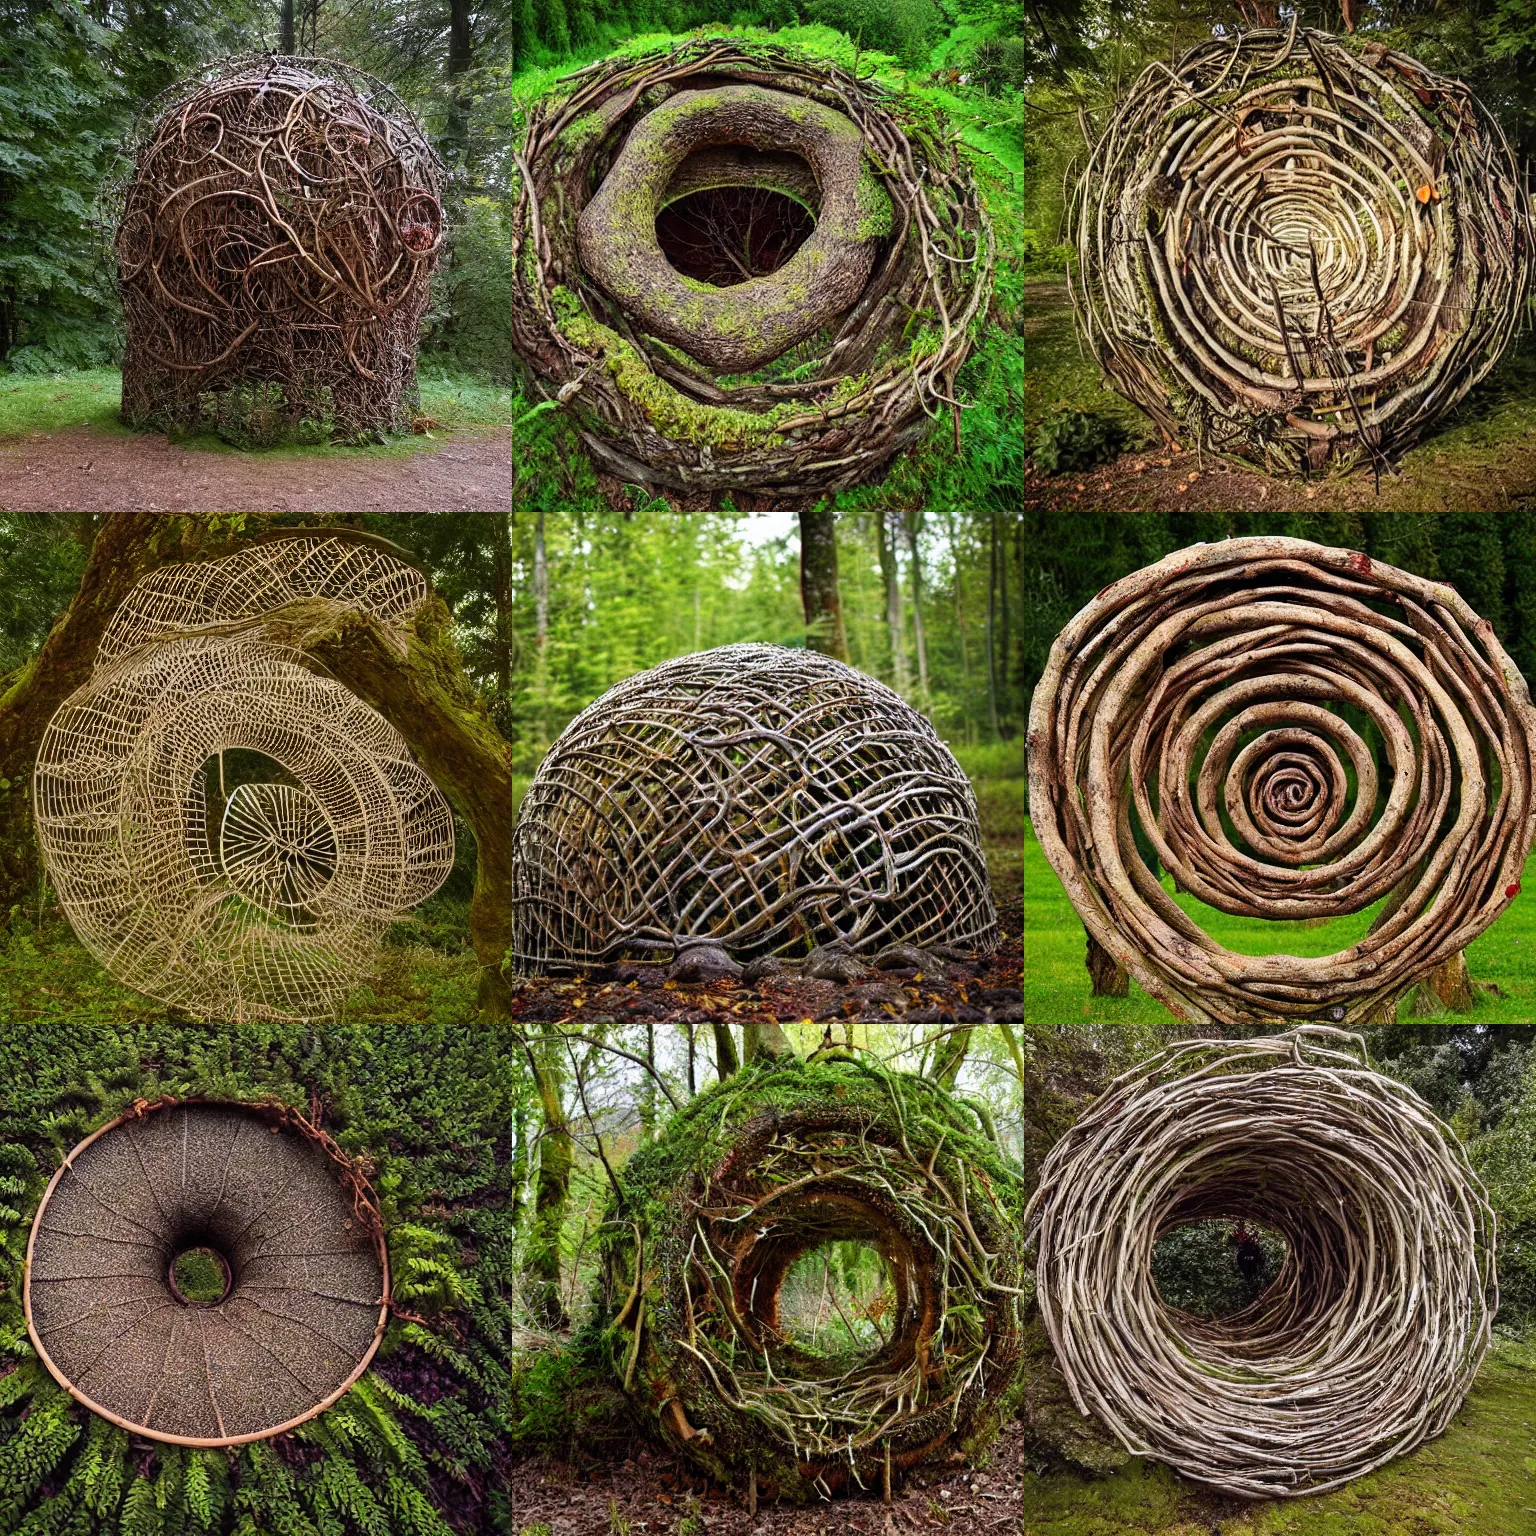 Prompt: an environment art sculpture by Nils-Udo, leaves twigs wood, nature, natural, round form, berries inside structure, leaf spiral pattern around structure